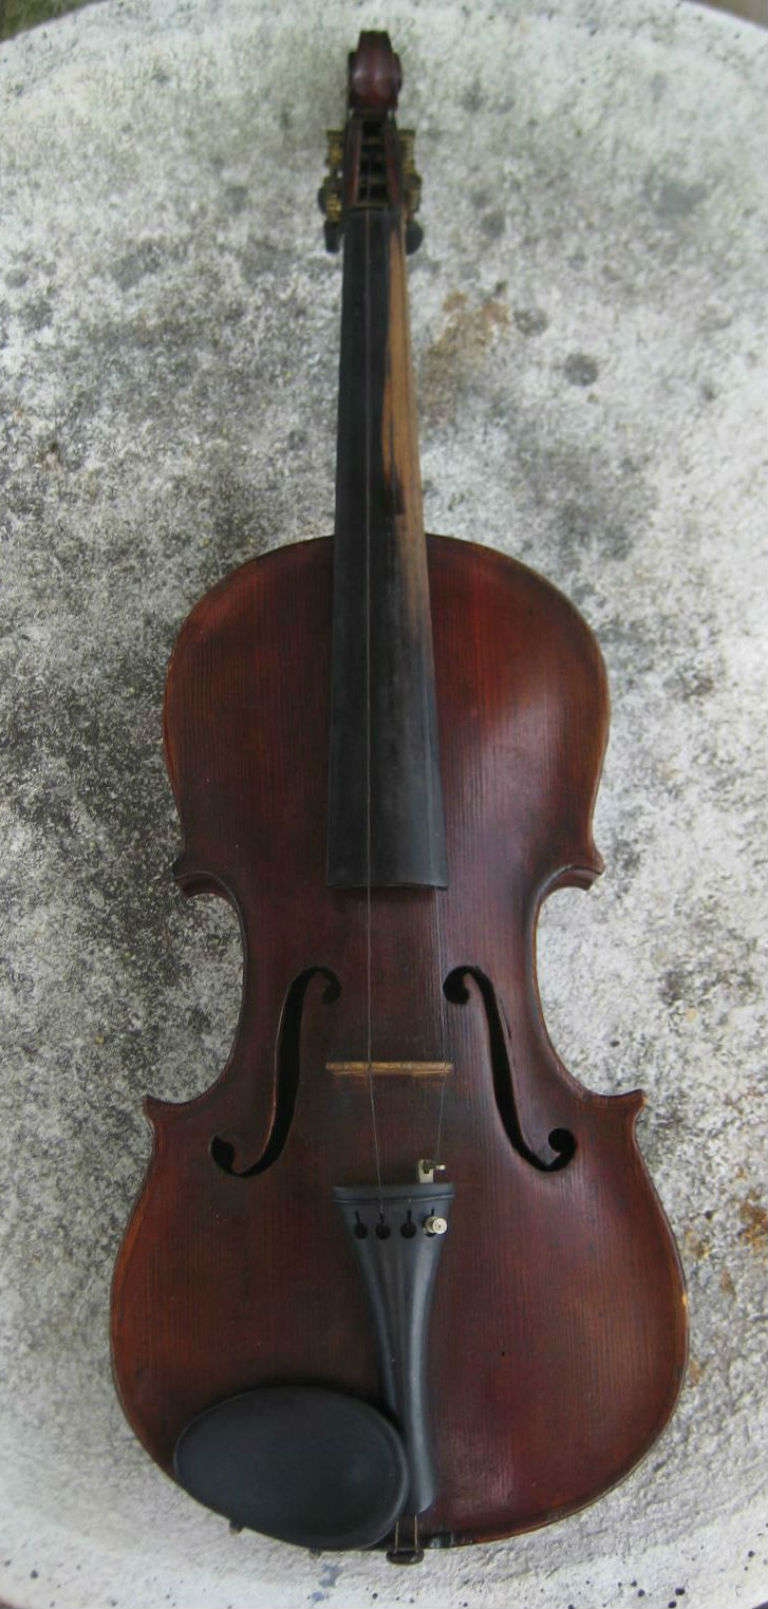 Antique violin, a full size violin with a two-piece maple back of descending horizontal curl, a spruce top and plain ribs, inlaid purfling, the ebony pegs have been replaced with mechainal tuning pegs, corner blocked and lined, bridge with fine